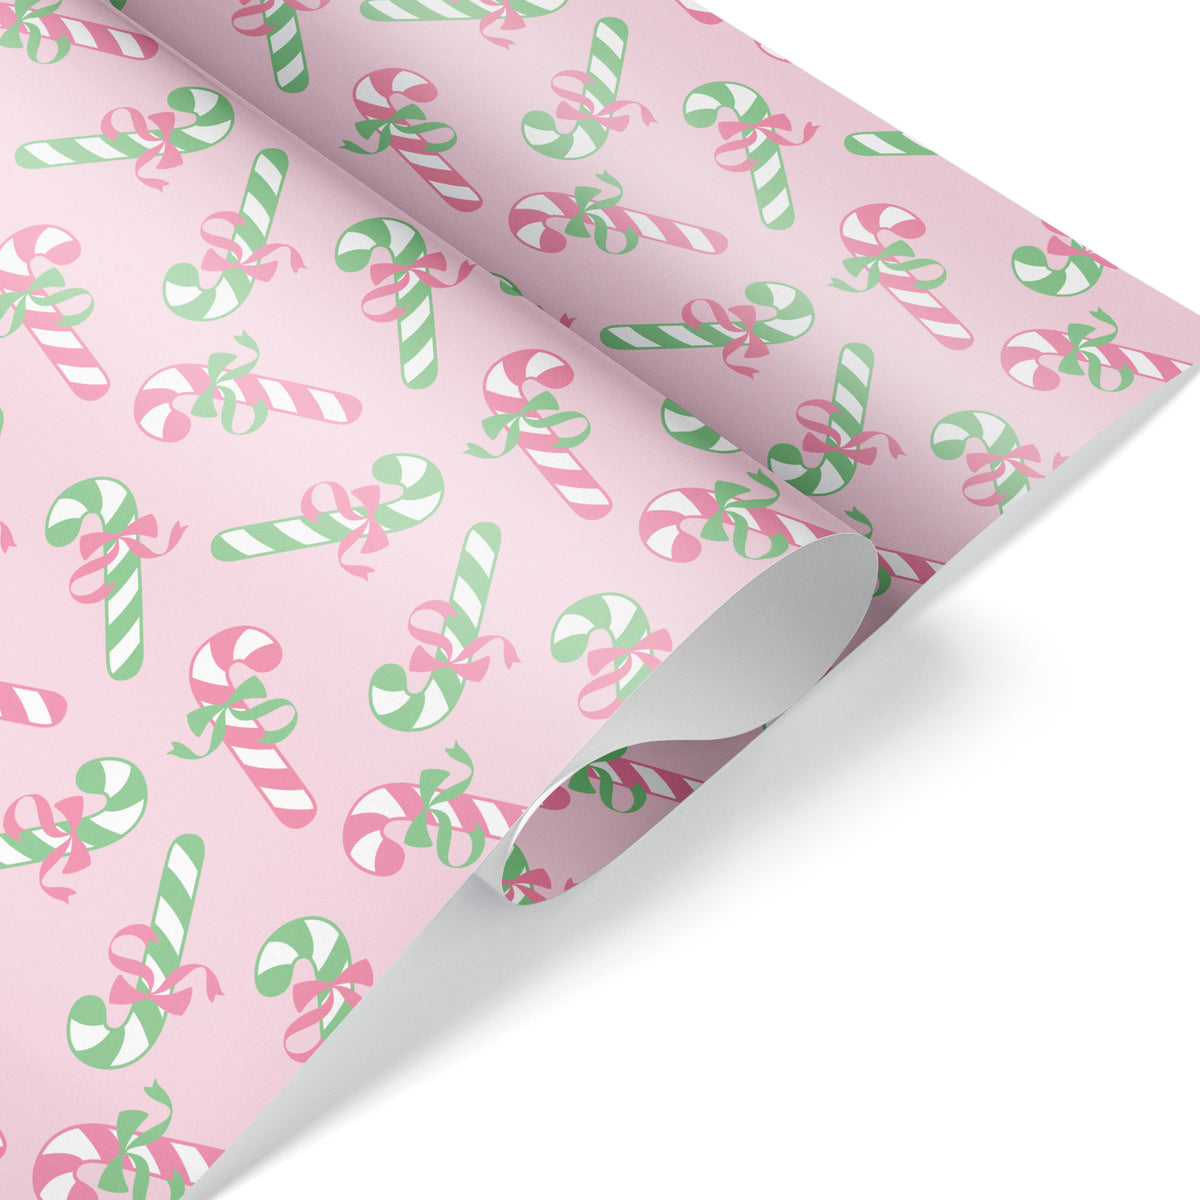 Candy Cane Pastel Christmas Wrapping Paper - PINK